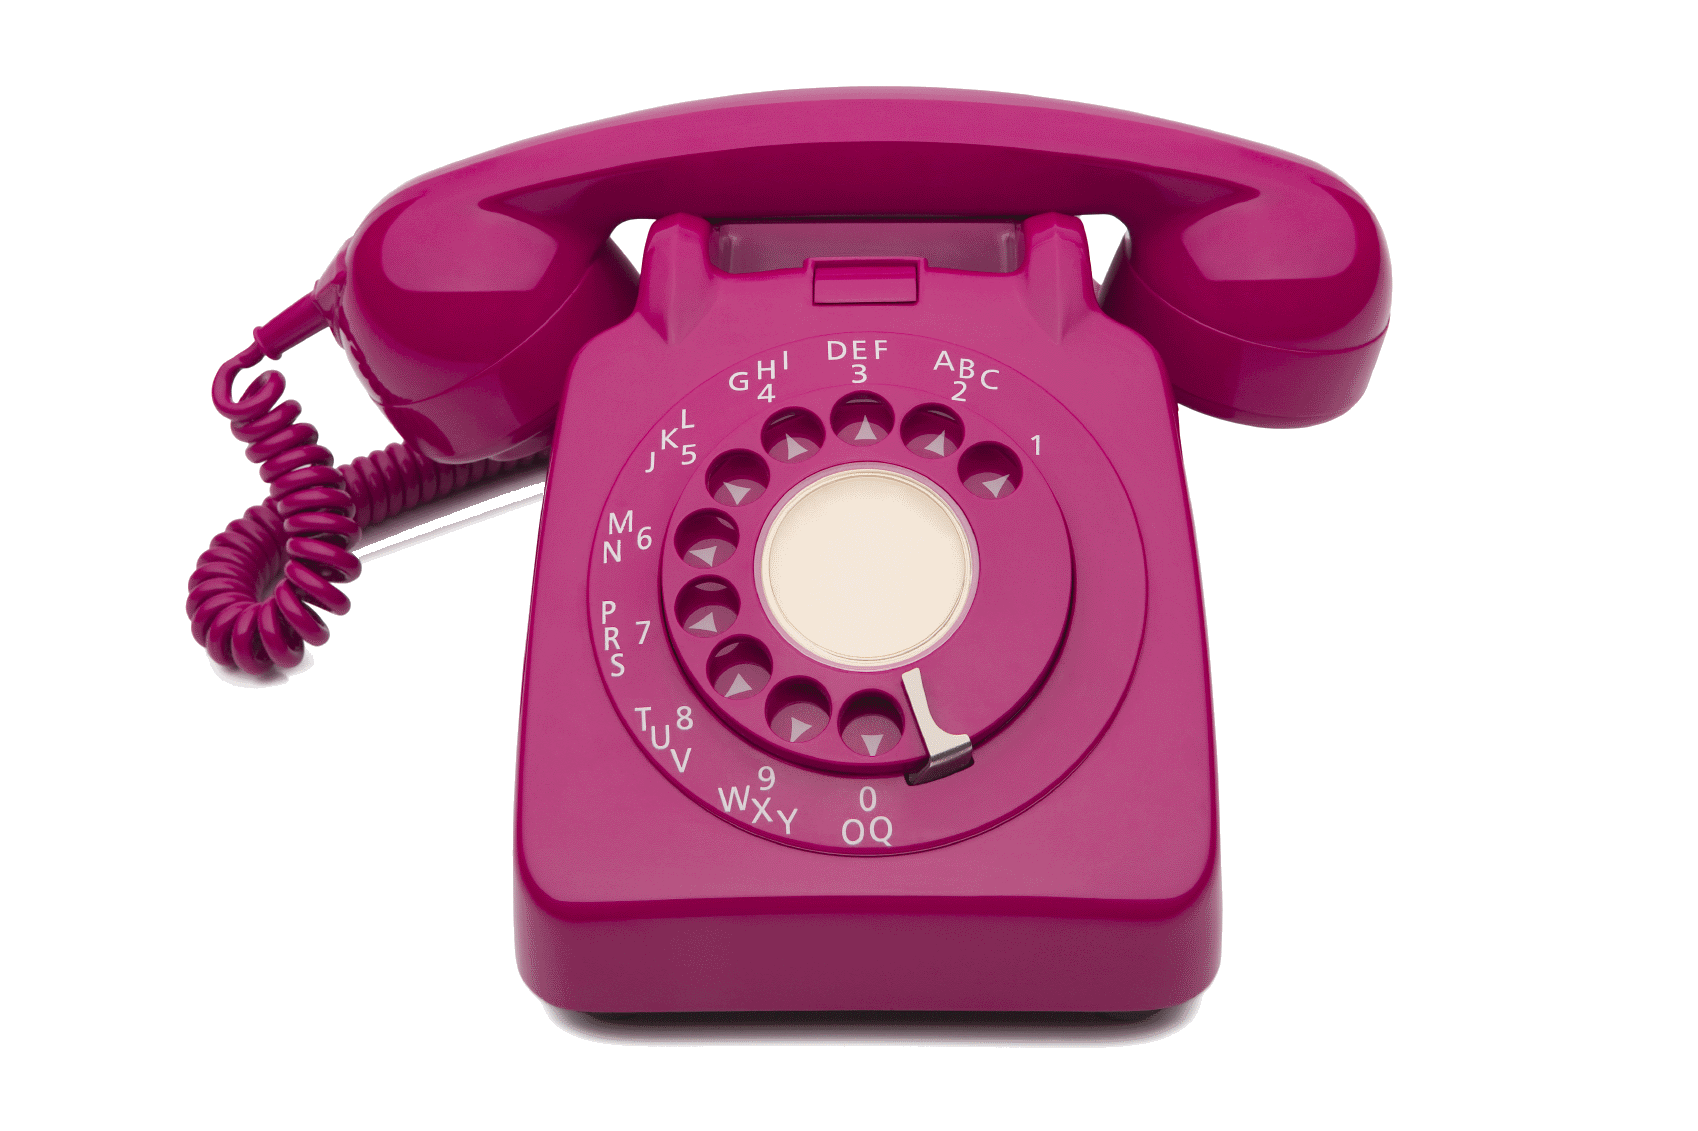 Purple transparent png stickpng. Phone clipart corded phone